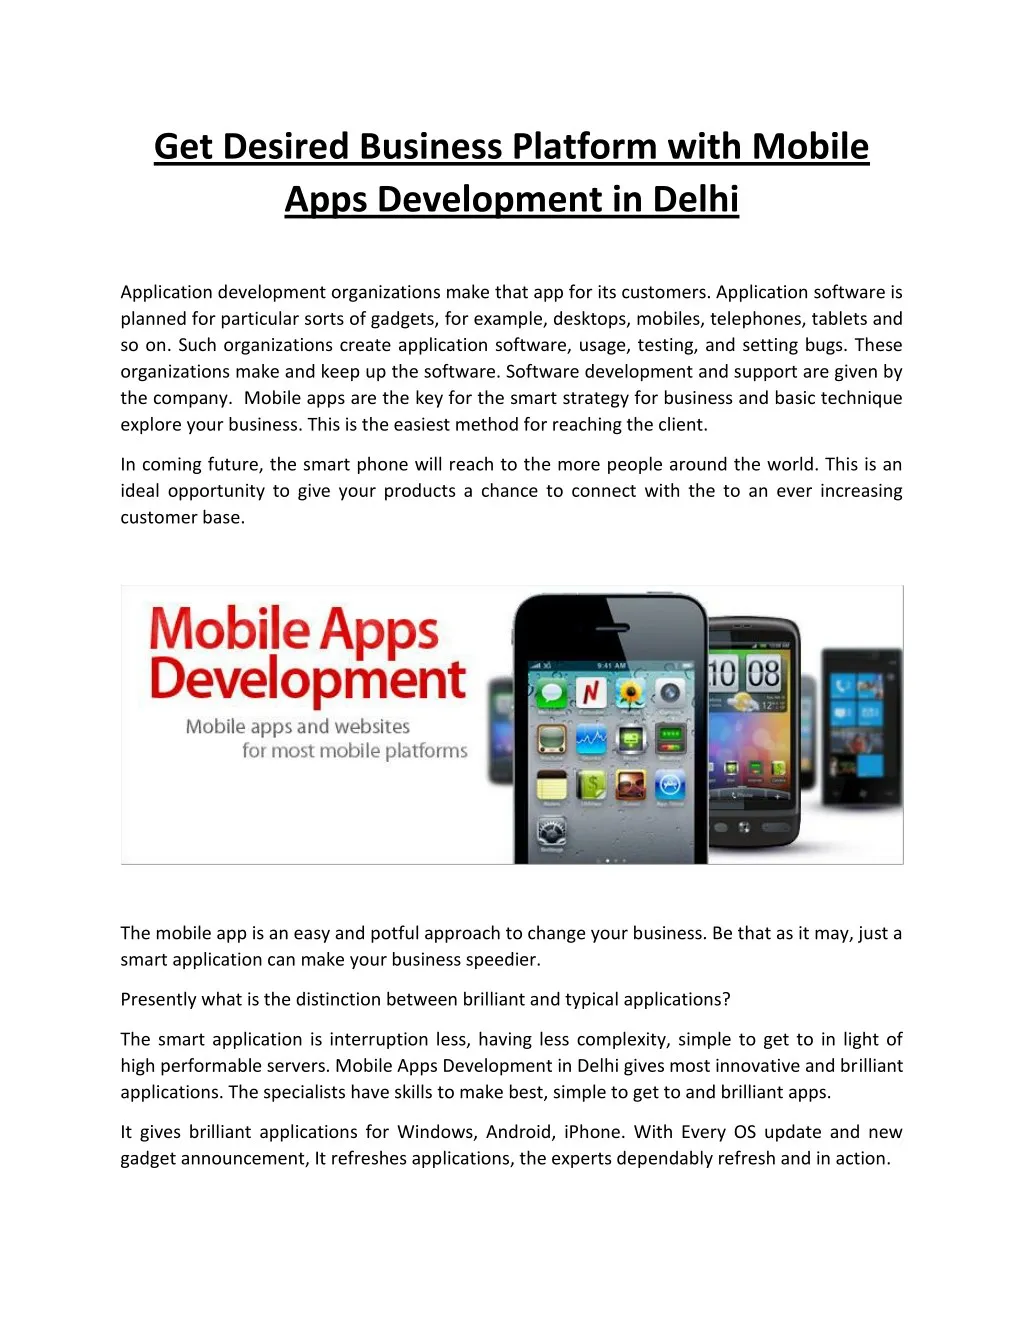 get desired business platform with mobile apps